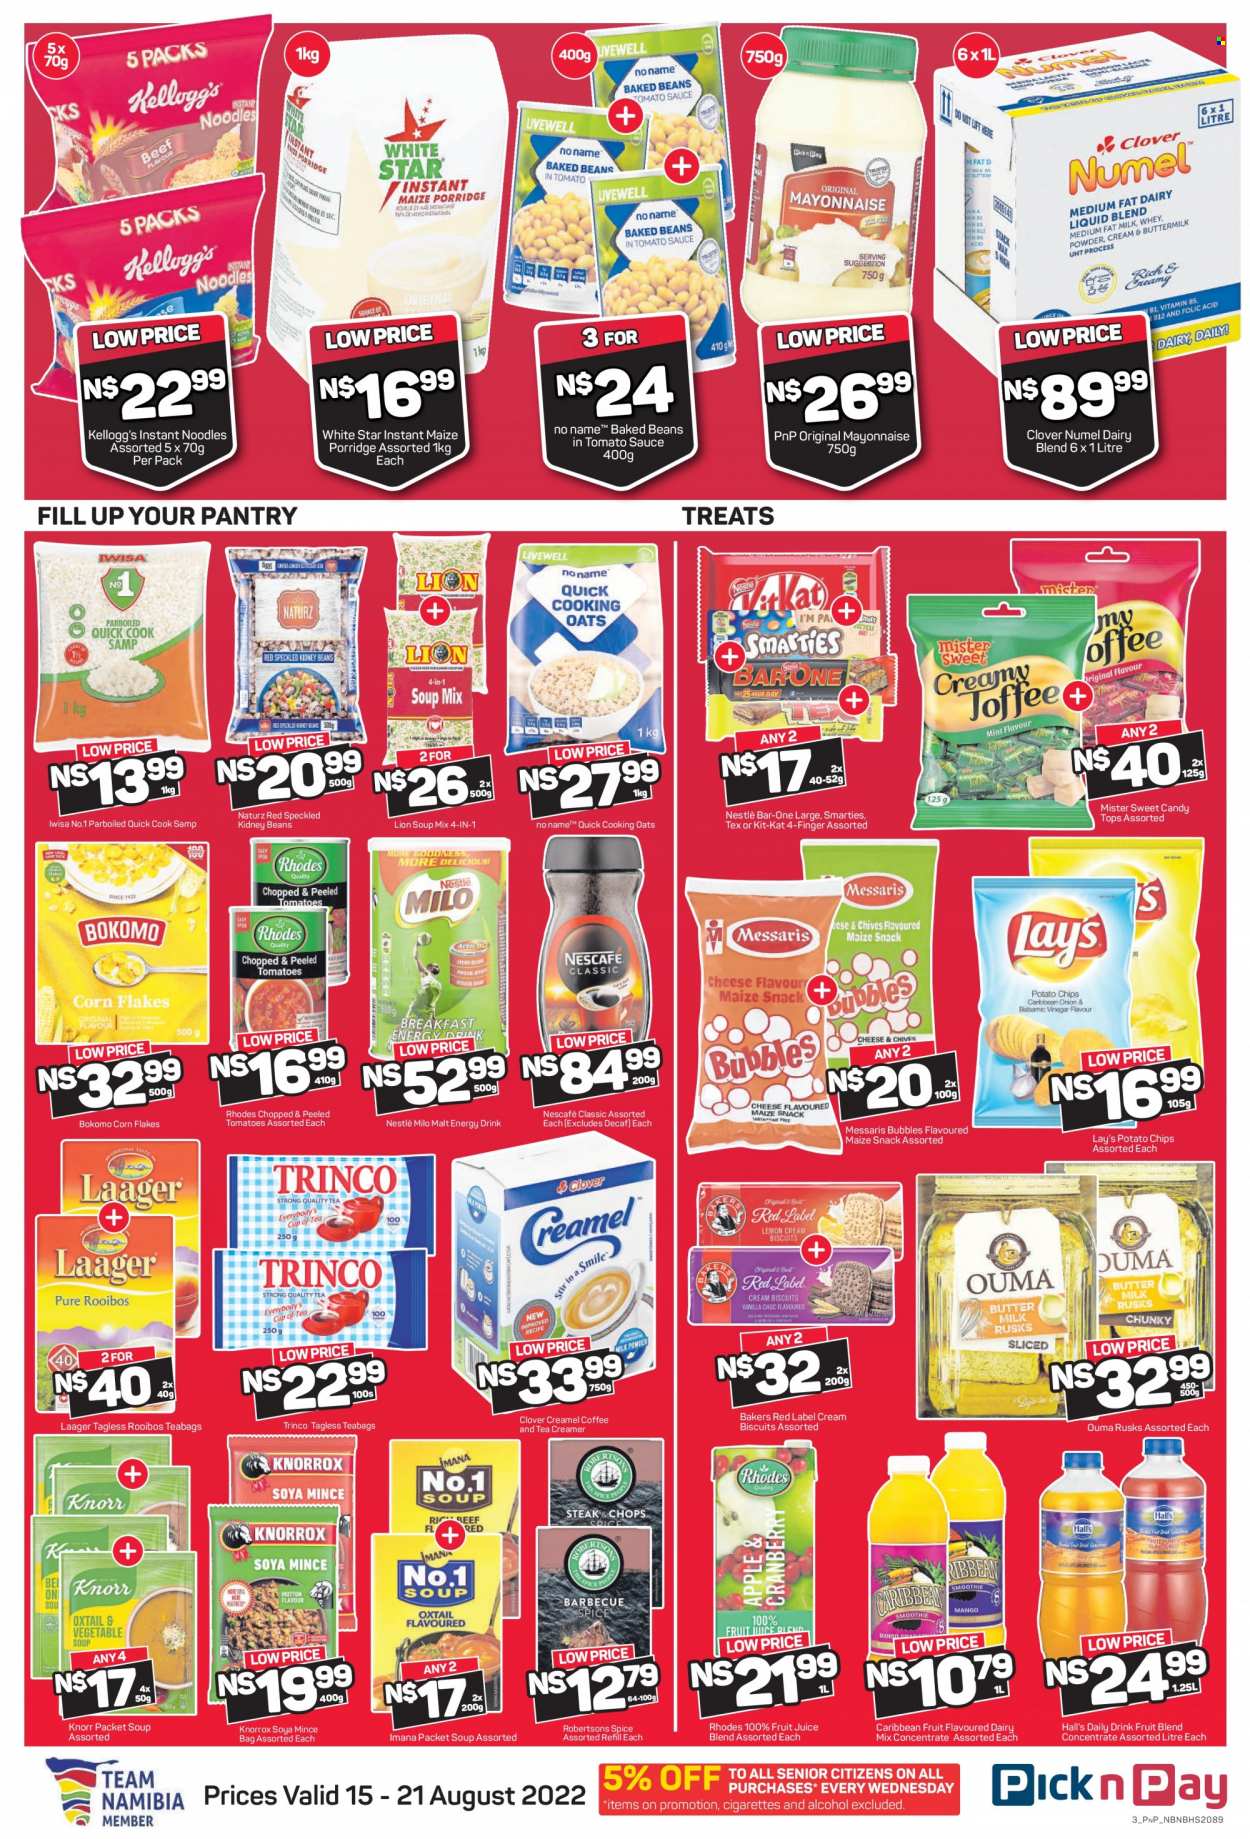 Pick n Pay catalogue  - 15/08/2022 - 21/08/2022 - Sales products - rusks, tomatoes, soup mix, soup, instant noodles, Knorr, noodles, Clover, Milo, dairy blend, creamer, coffee and tea creamer, mayonnaise, Nestlé, snack, Smarties, Kellogg's, biscuit, potato chips, chips, Lay's, maize snack, oats, soya mince, White Star, Knorrox, kidney beans, baked beans, corn flakes, porridge, spice, energy drink, fruit juice, juice, tea, tea bags, rooibos tea, coffee, Nescafé, alcohol, Bakers. Page 4.